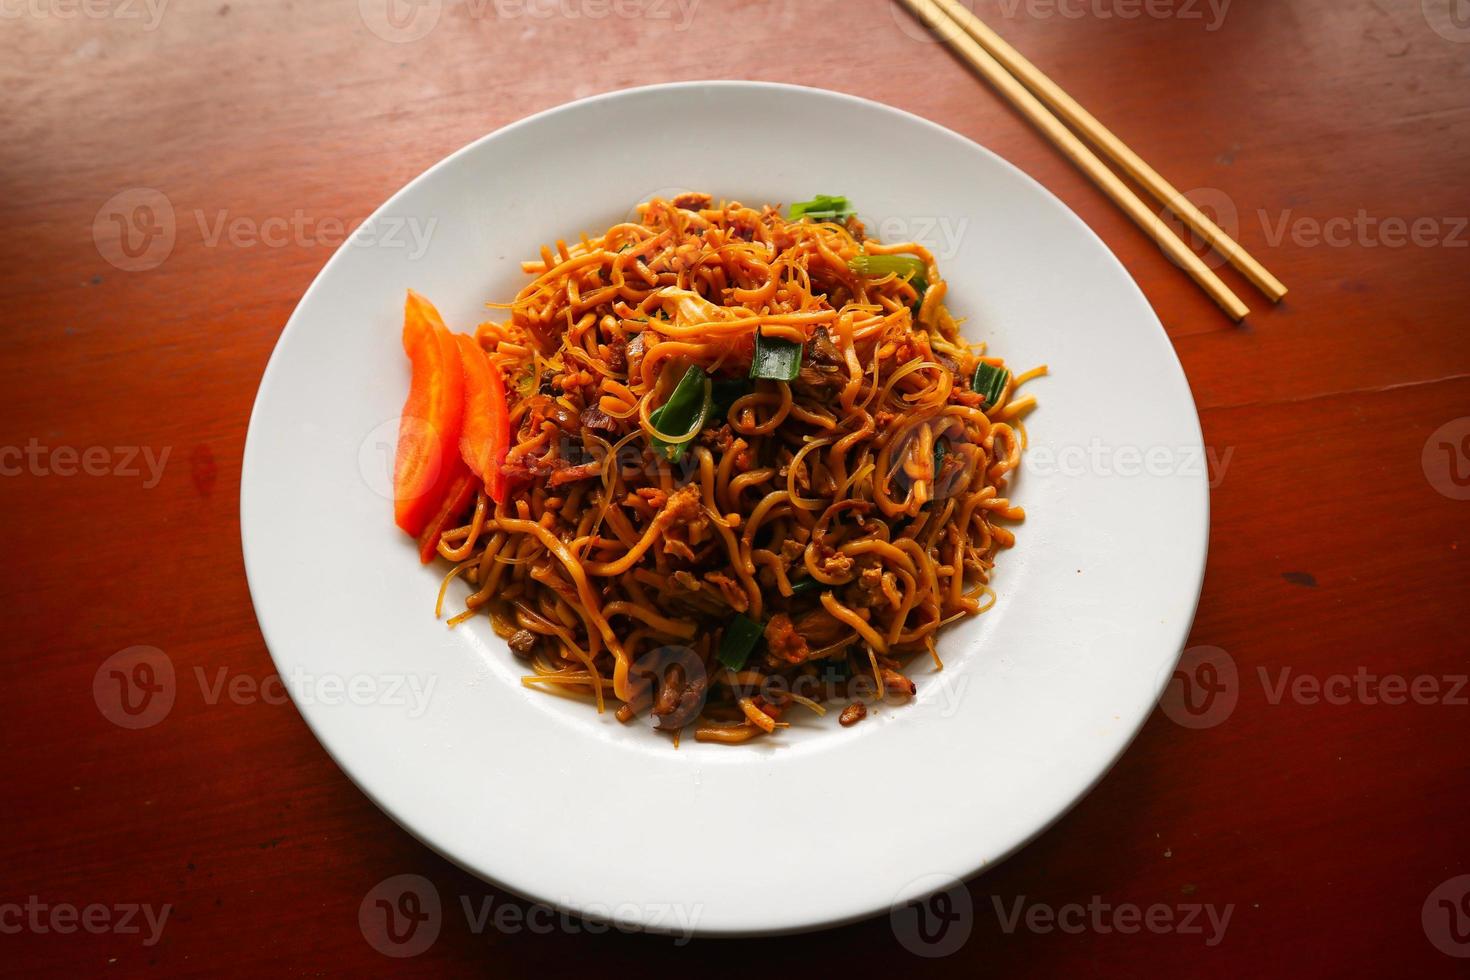 yakisoba is traditional stir fried noodle japan, made from noodles, cabbage, vegetables and meat, seasoning with oyster sauce or yakisoba sauce. yakisoba served on plate photo